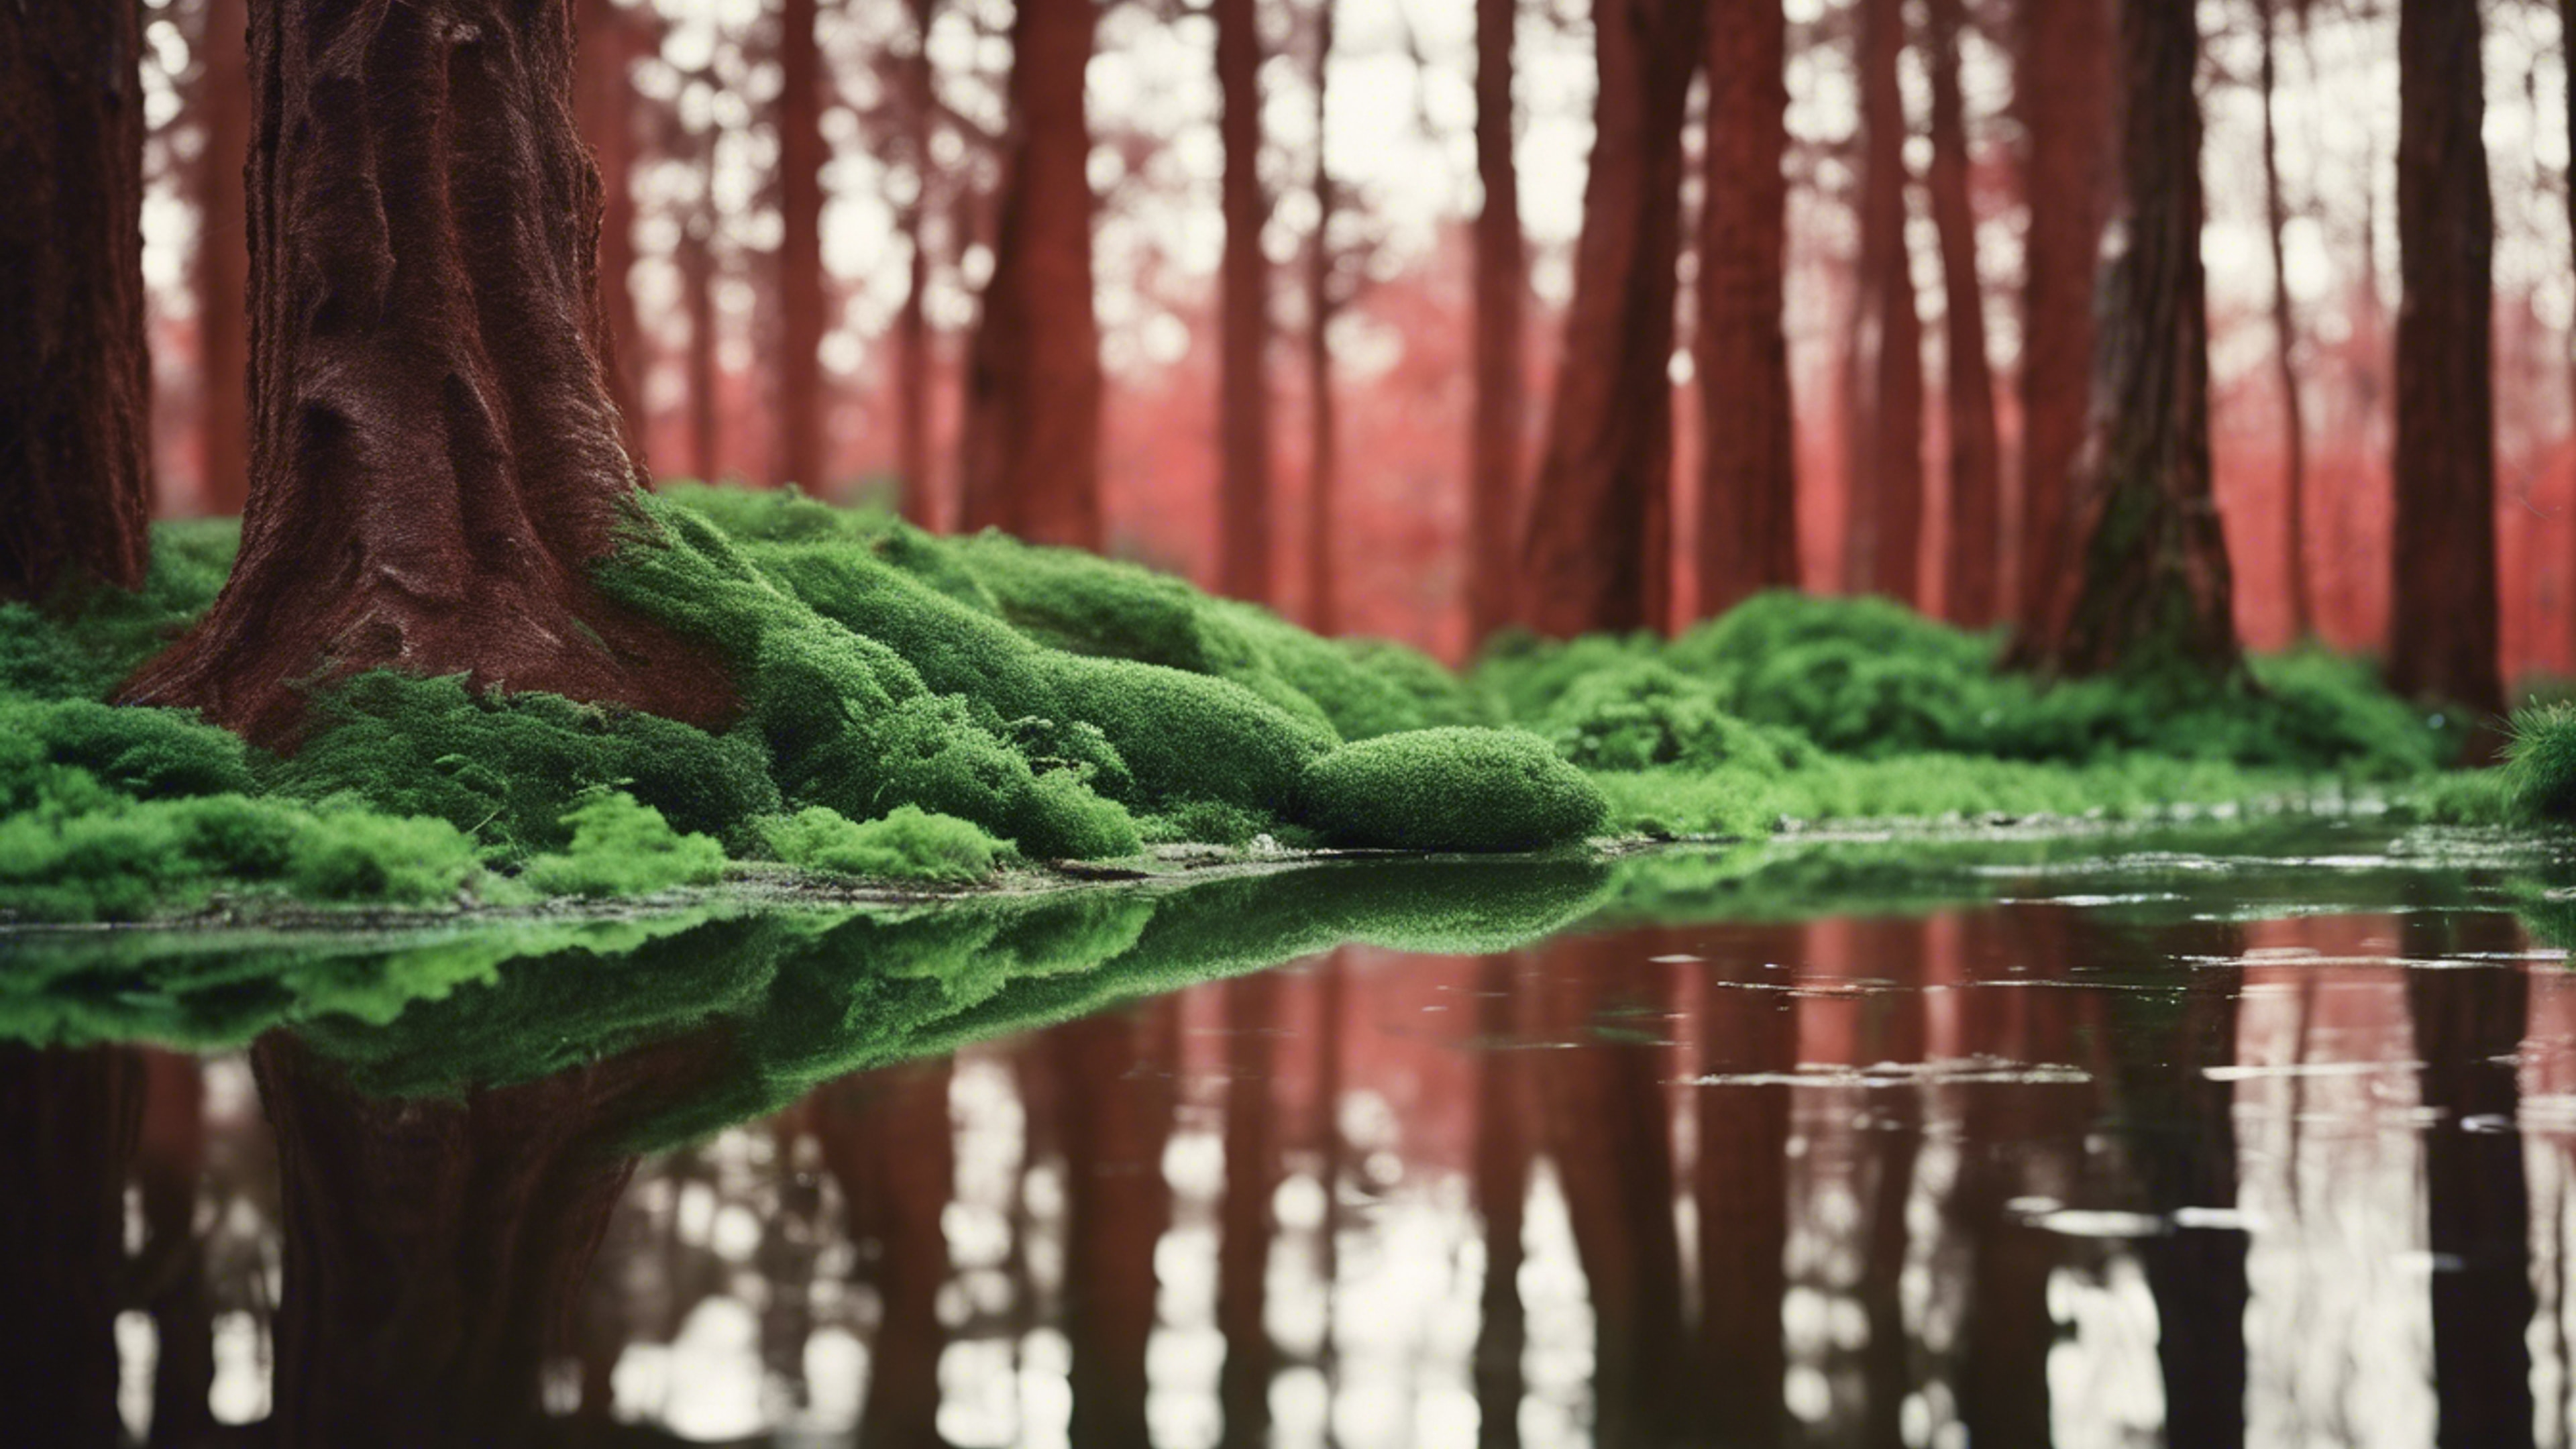 Lush, green forest reflections on a shiny, red leather surface. טפט[6f4e1618f75b40719461]